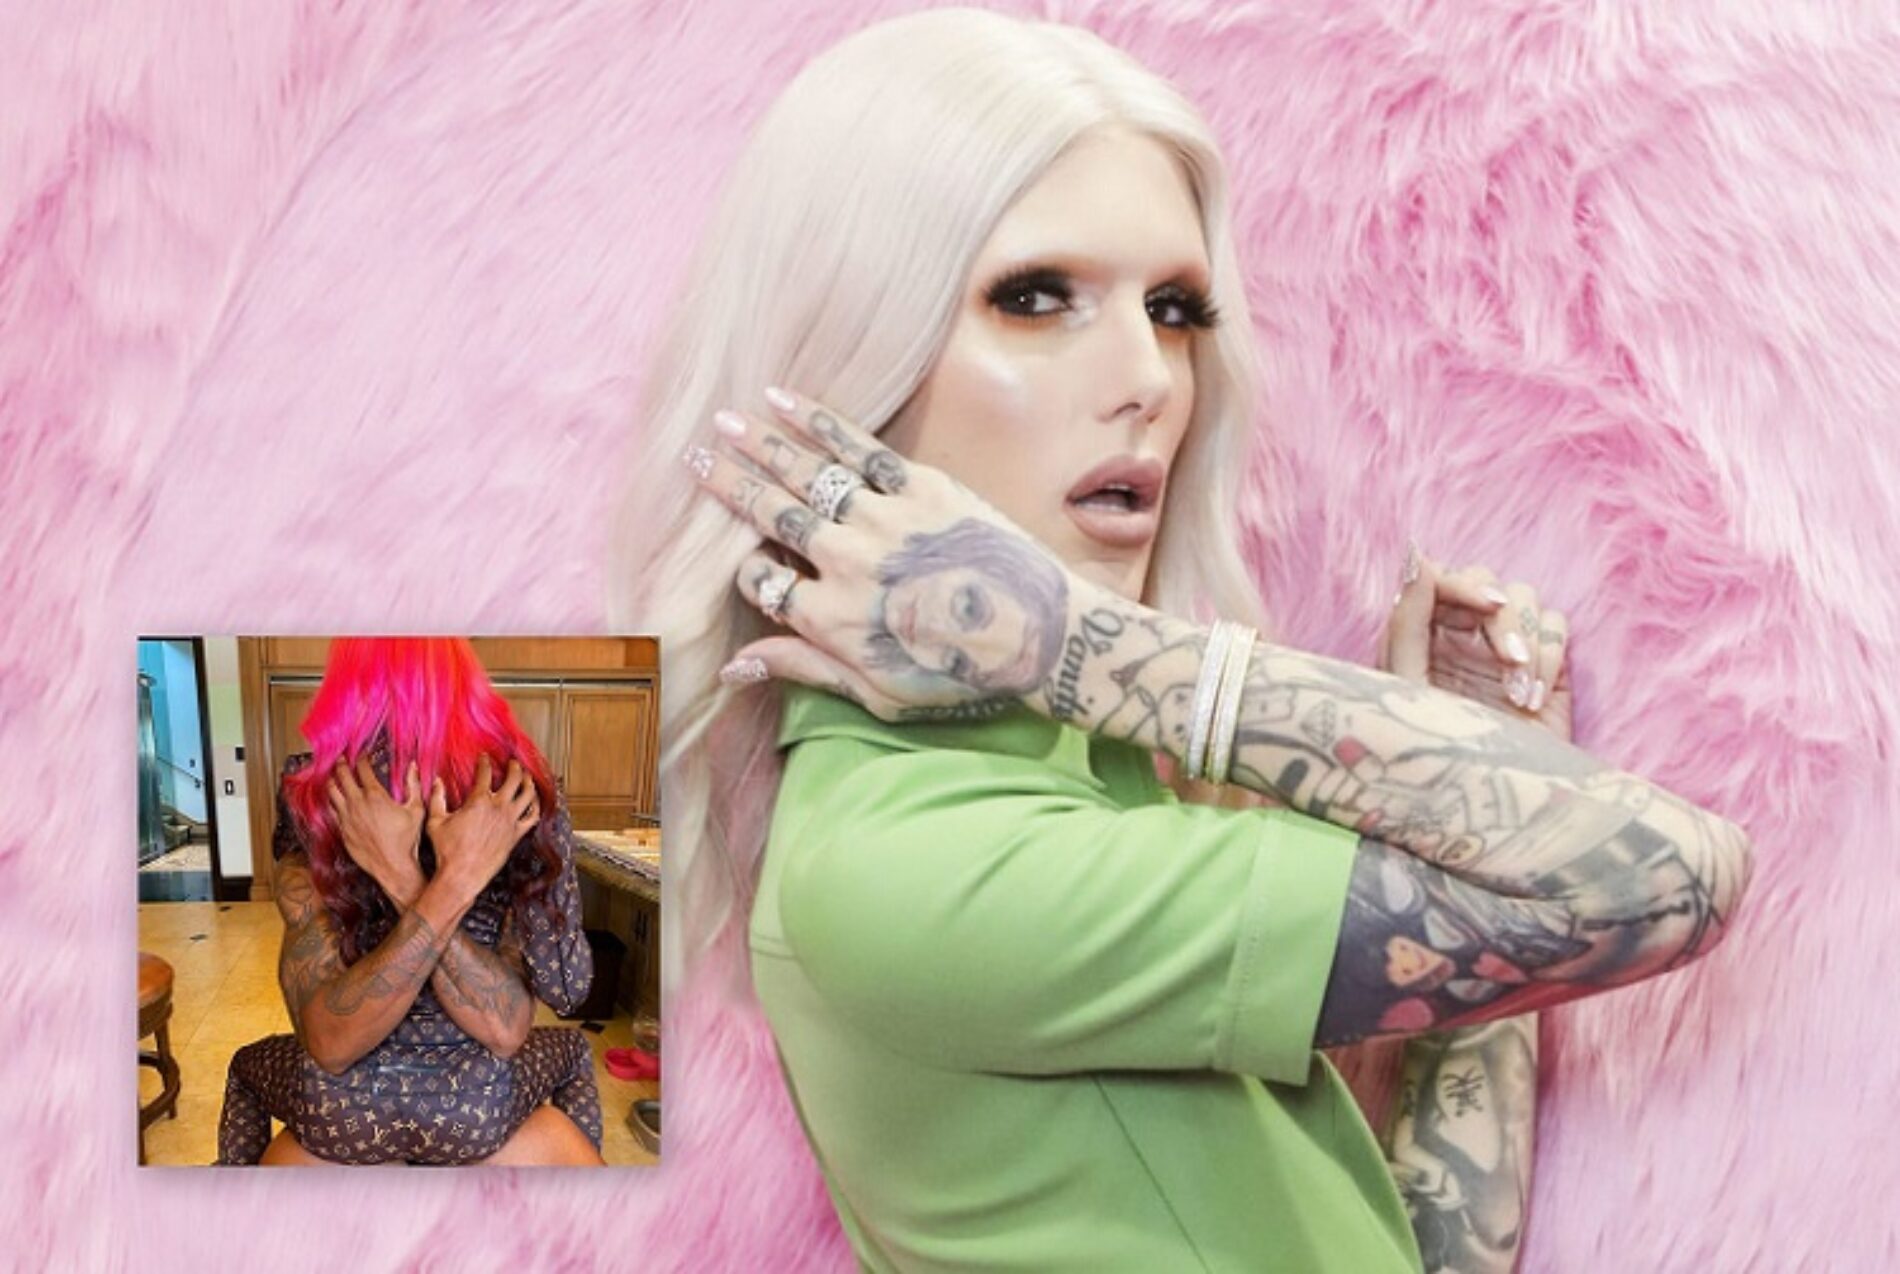 Beauty Guru Jeffree Star Posts About His New Boyfriend And The Internet Immediately Unearths His Identity, Outing Him